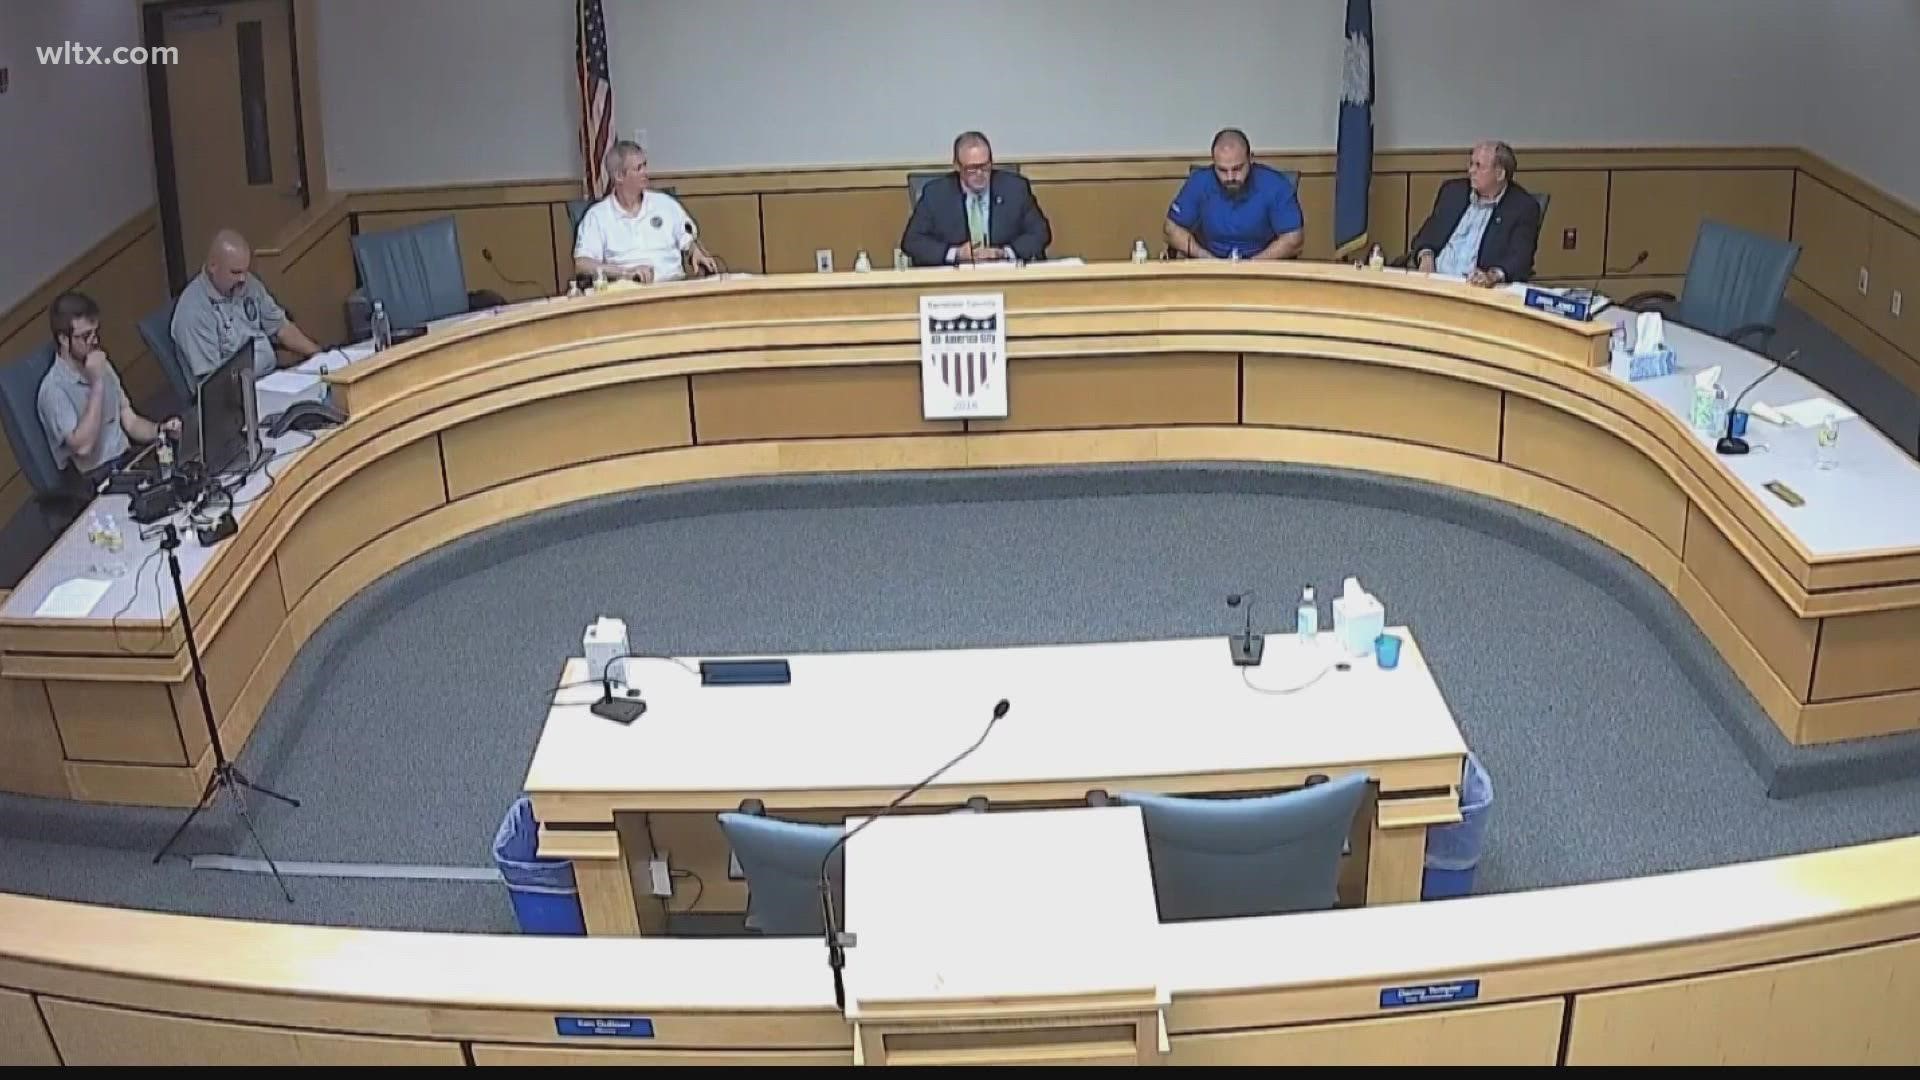 The Town of Elgin held a virtual town hall meeting on Wednesday to answer questions about the swarm of 70 earthquakes near Elgin since December.